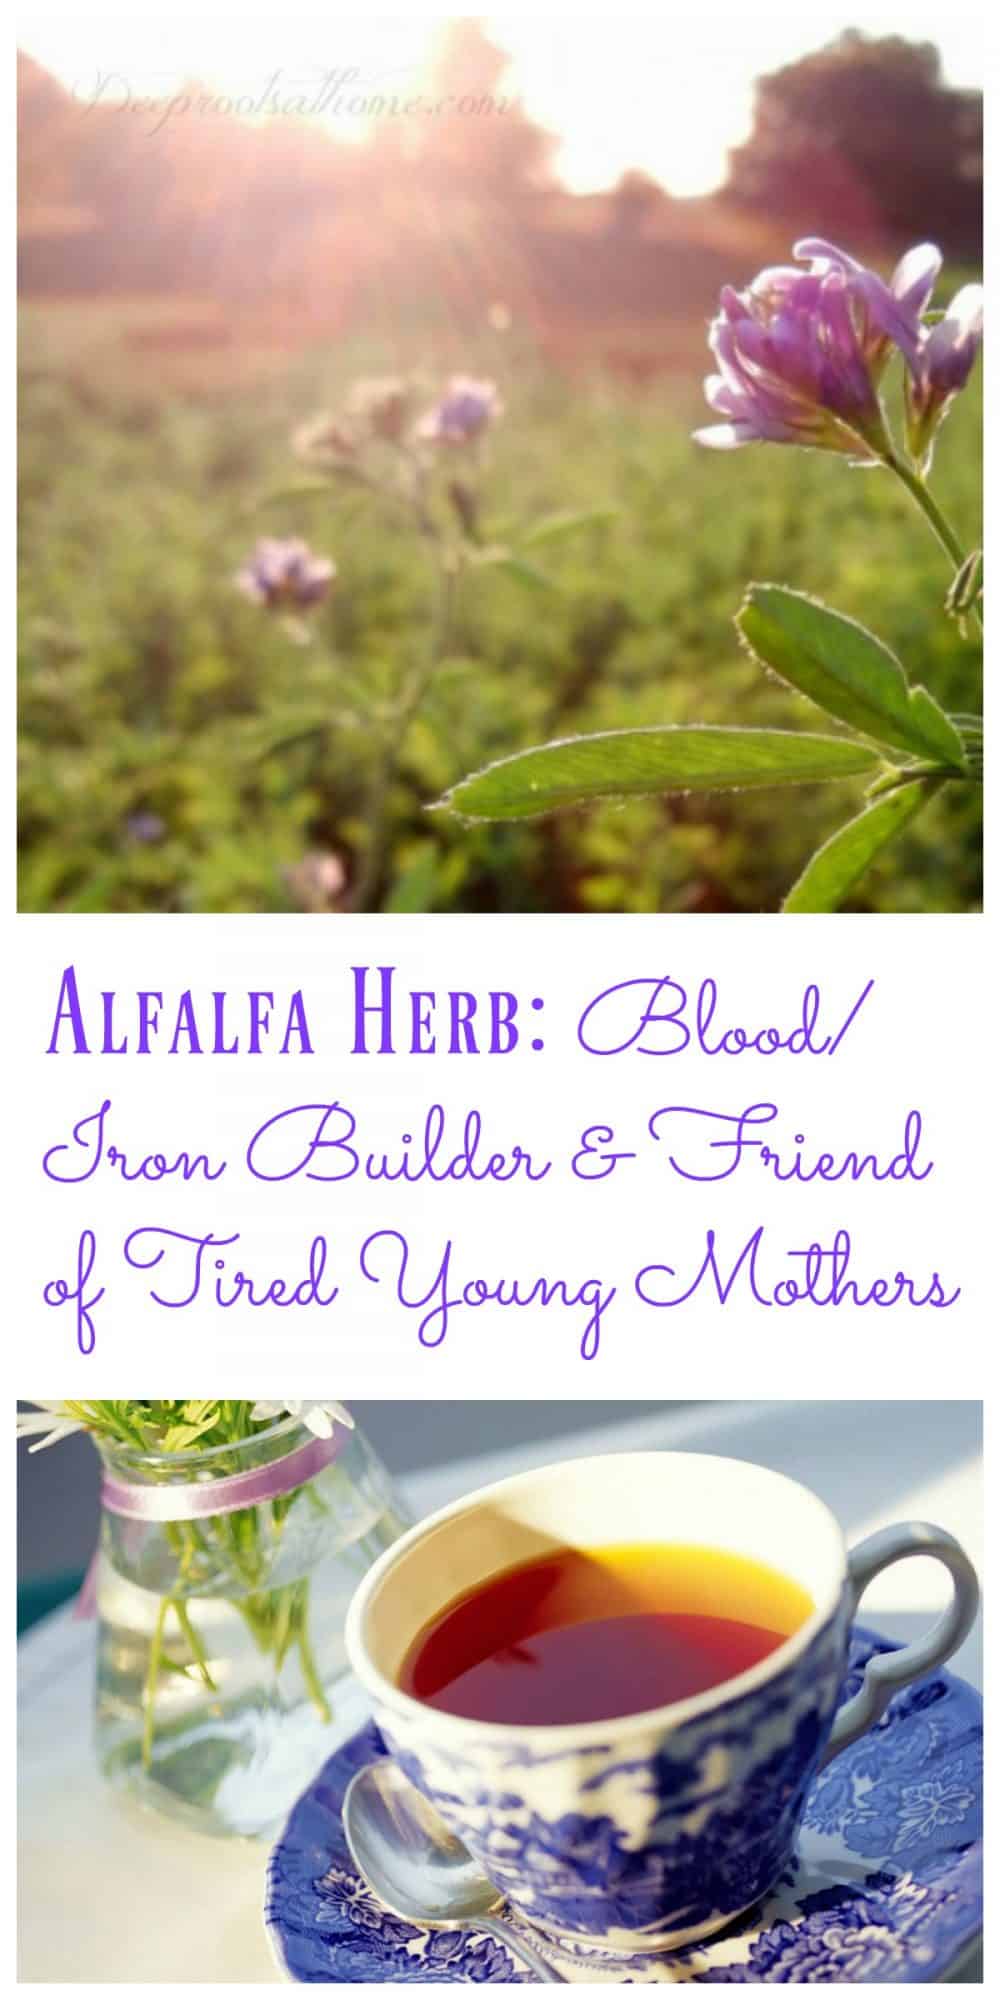 Alfalfa Herb: Blood/Iron Builder & Friend of Tired Young Mothers, alfalfa herb, Bulk Herb Store, cut leaf, organic, harvest, herbal tea, builds iron, detox, increases breast milk, urinary tract infections, blood cleaner, loaded with vitamins, chlorophyll, cancer preventative, Bulk Herb Store, organic, medicago sativa, tonic herb, 